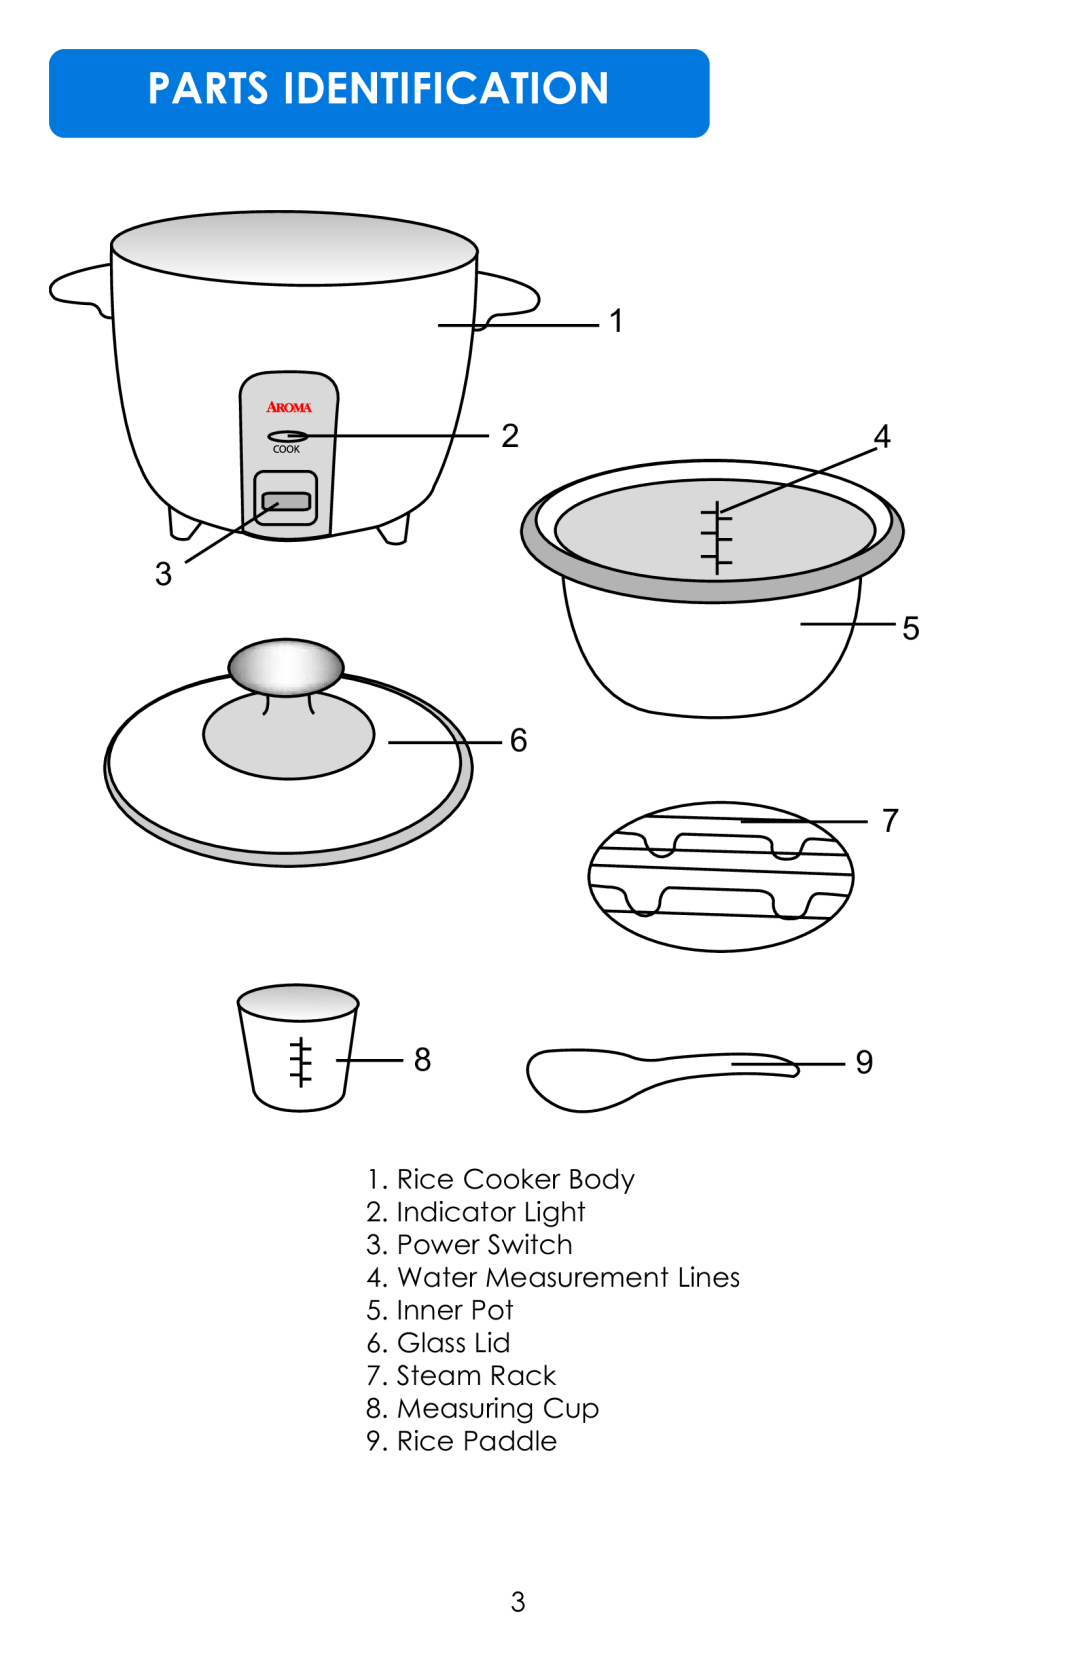 Aroma ARC-730G Parts Identification, Rice Cooker Body 2. Indicator Light 3. Power Switch, Measuring Cup 9. Rice Paddle 